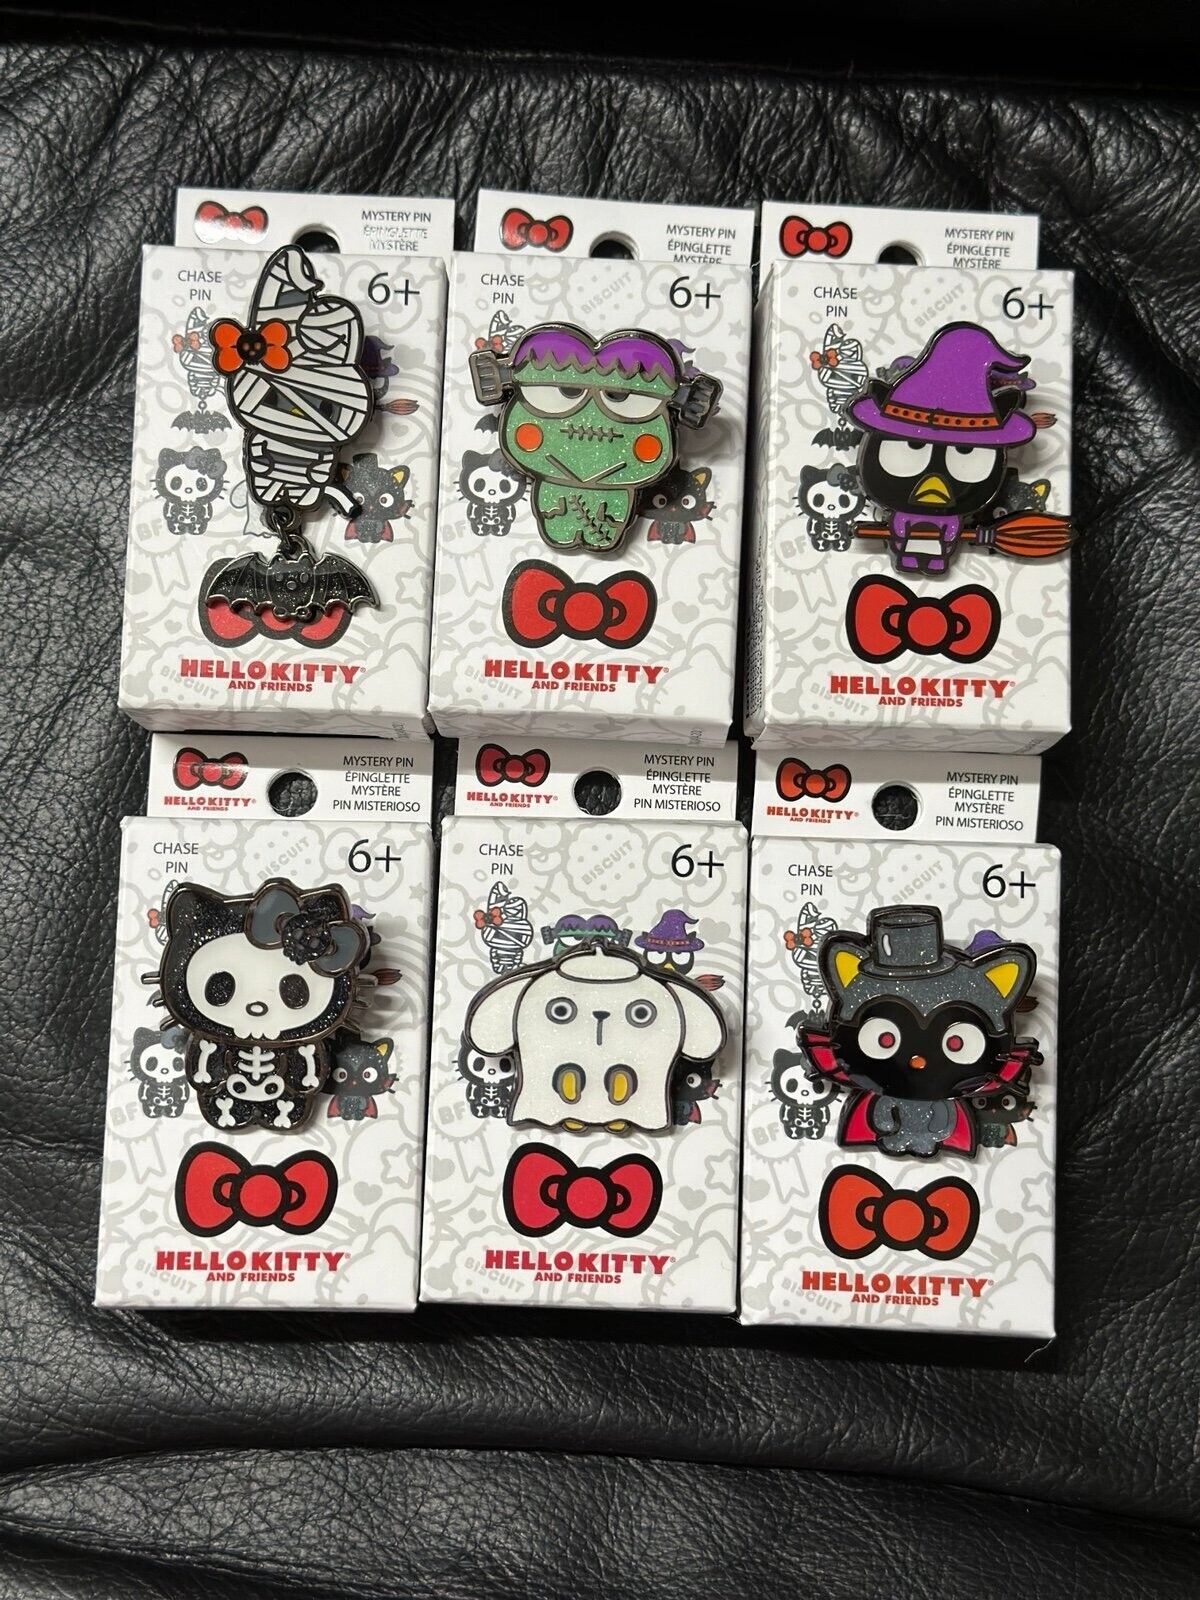 Loungefly Sanrio Hello Kitty & Friends Halloween Enamel Pin (CHASE) Complete Set